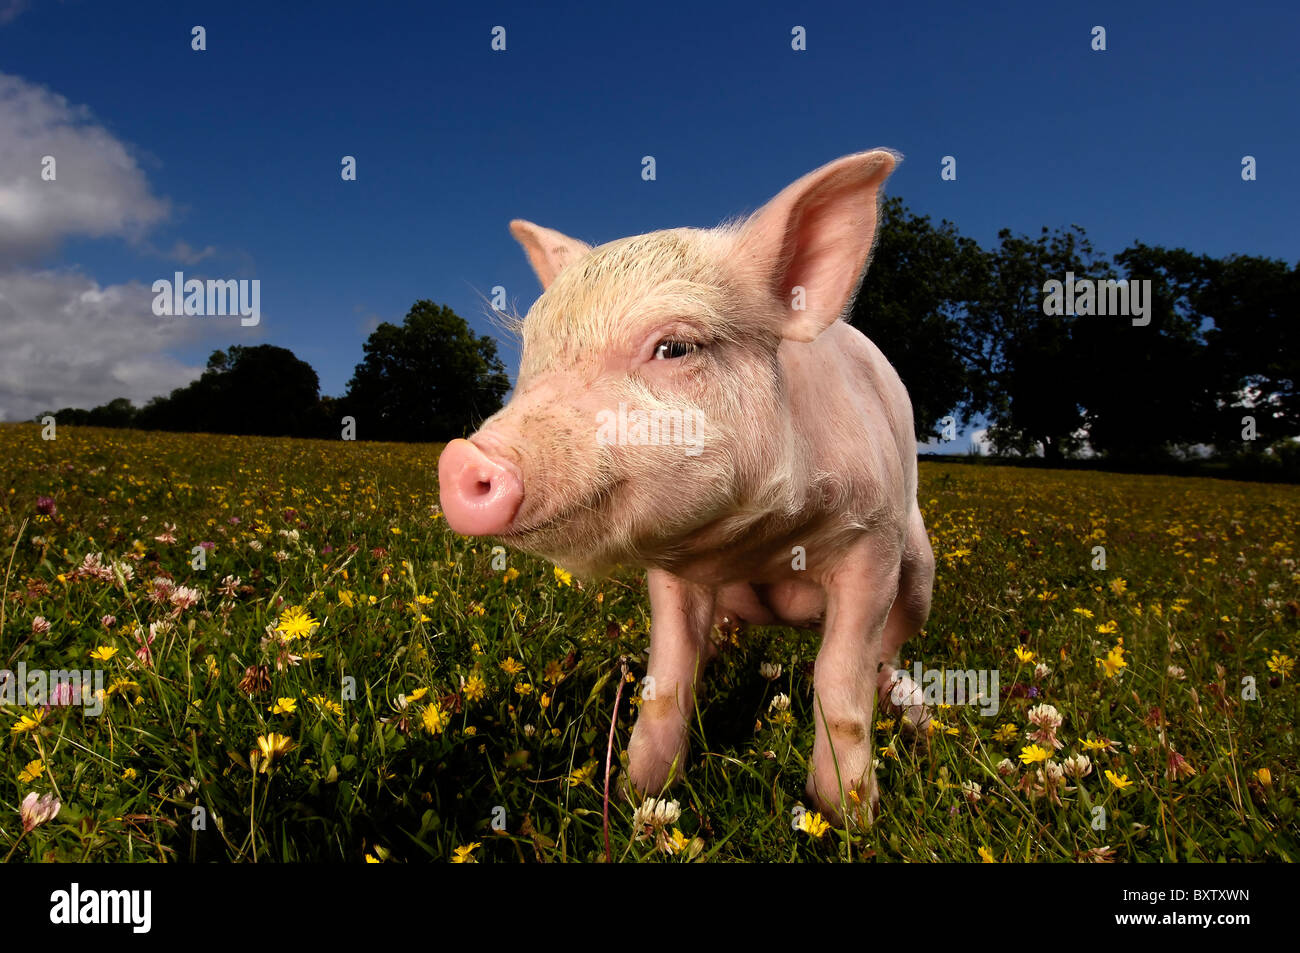 Cute Piglet in a field full of daisy's with a bright blue sky Stock Photo